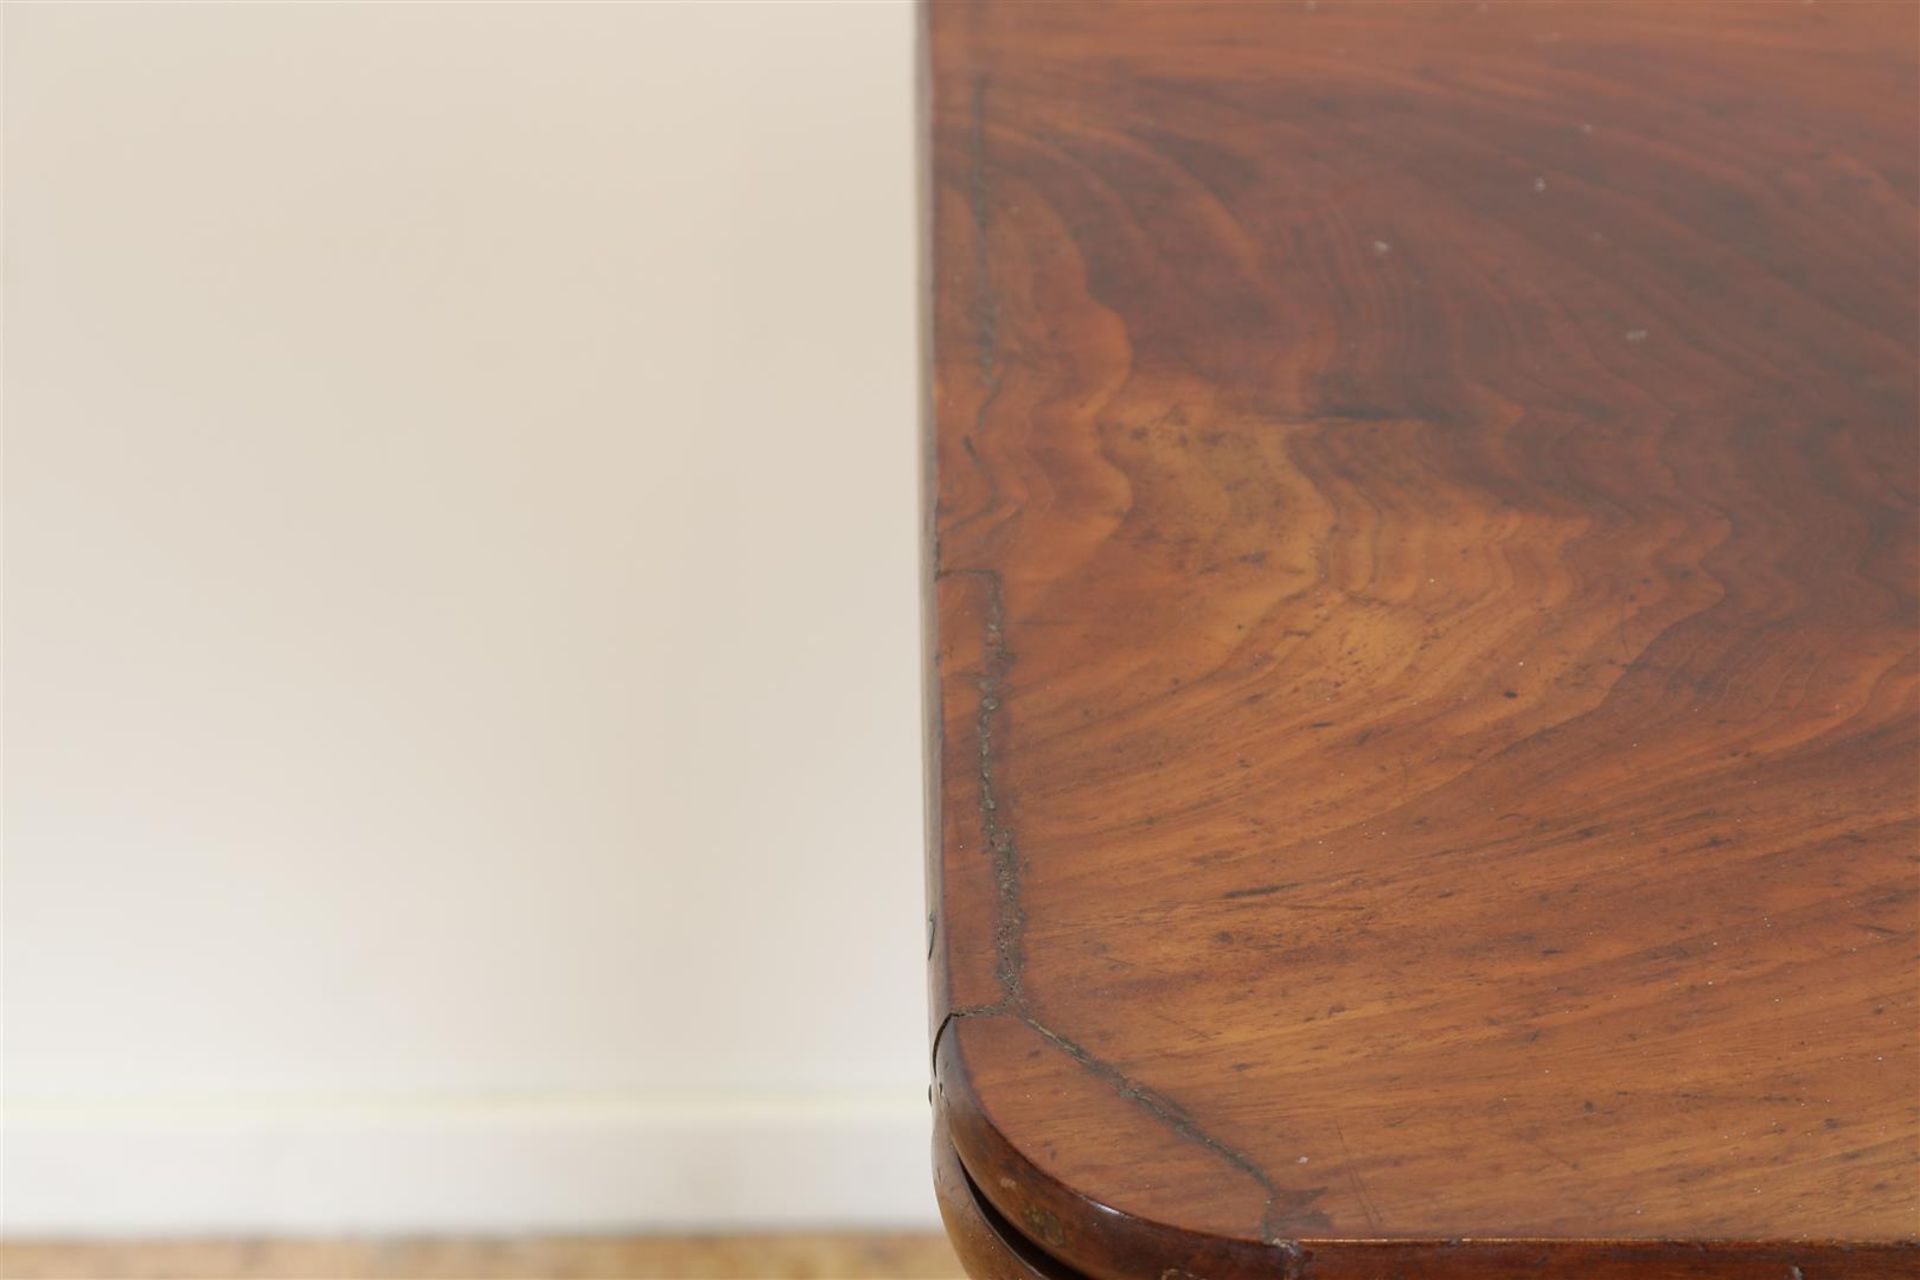 Mahogany gaming table on 4 sprant, 19th century, veneer damage to top, h. 76, w. 82, d. 40 cm. - Image 5 of 6